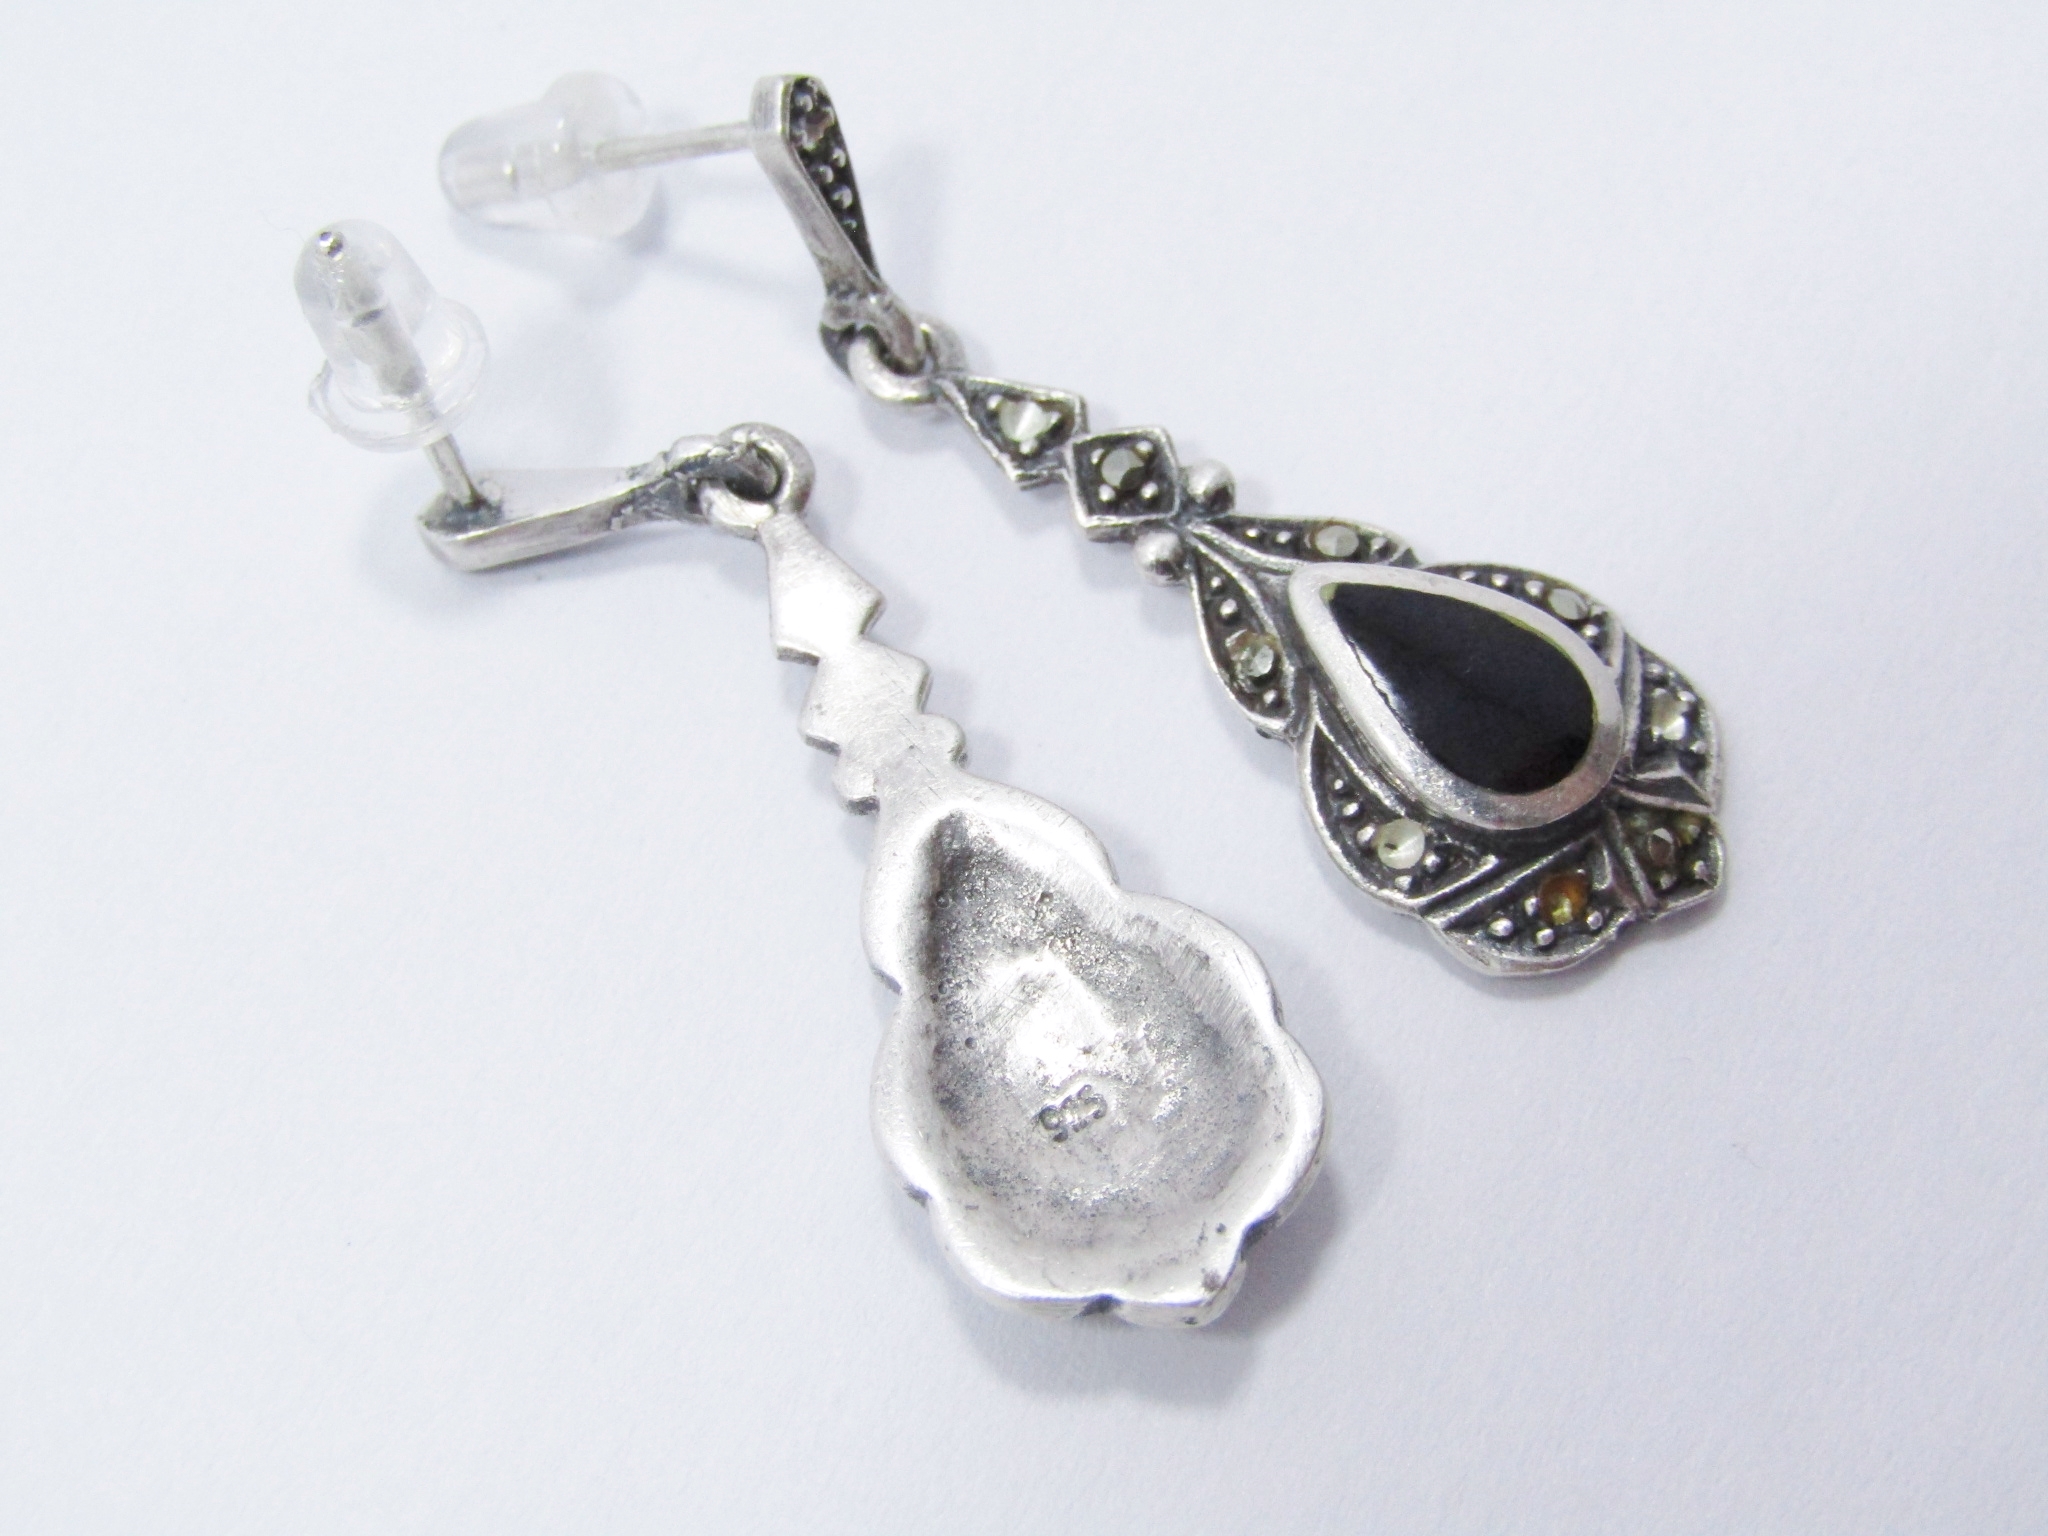 Beautiful Vintage Design Drop Earrings With Black Stone And Marcasite’s in Sterling Silver.